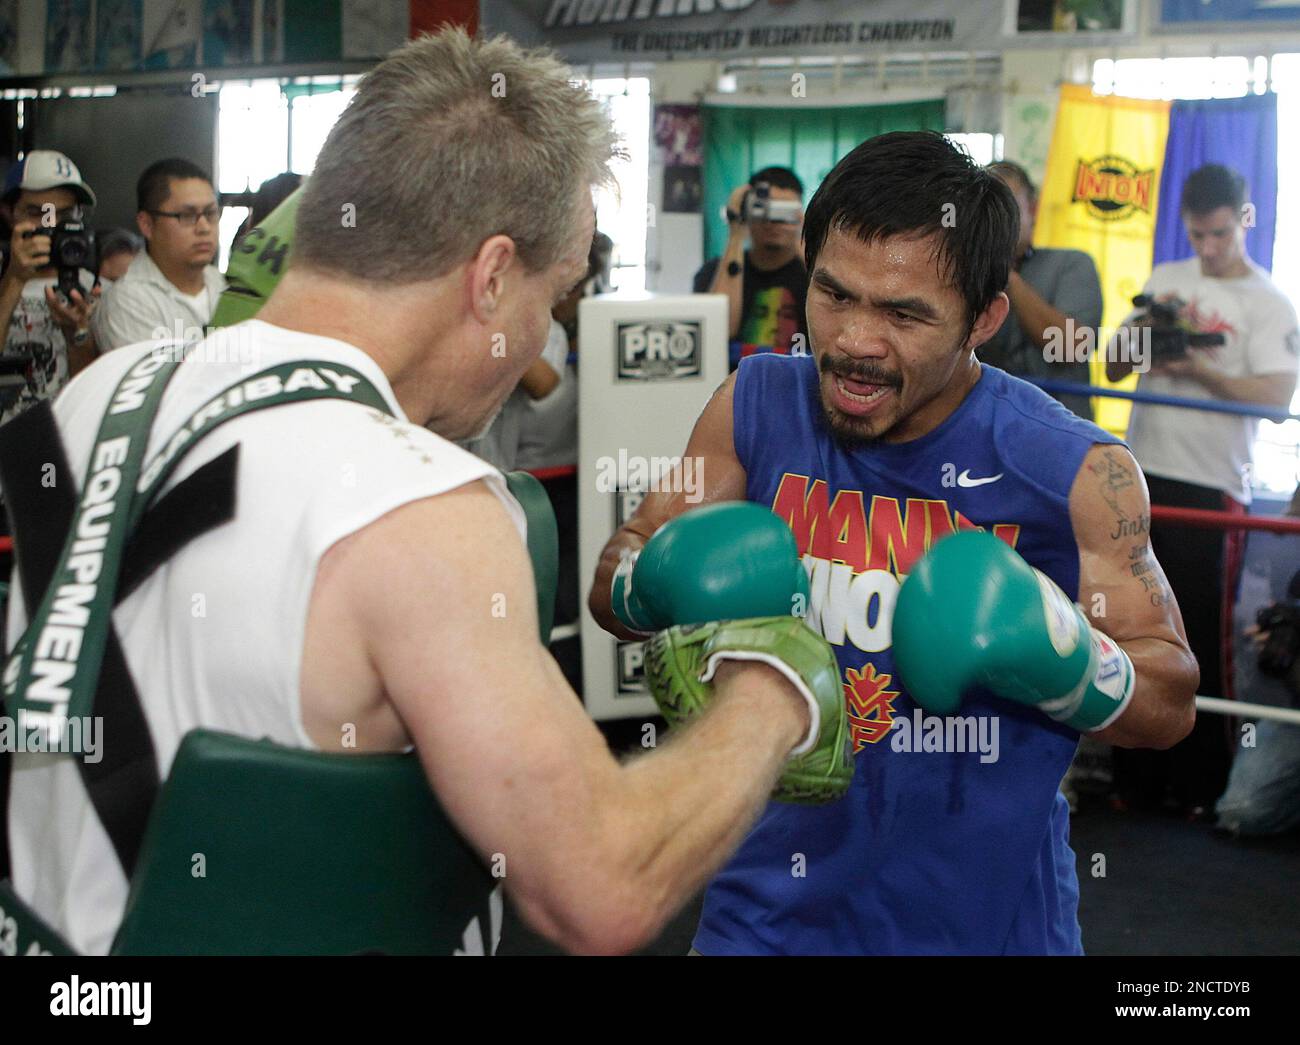 Boxer Manny Pacquiao, right, of the Philippines, trains with Freddie Roach for his upcoming boxing match with Antonio Margarito at the Wild Card Gym in Los Angeles, Wednesday, Oct